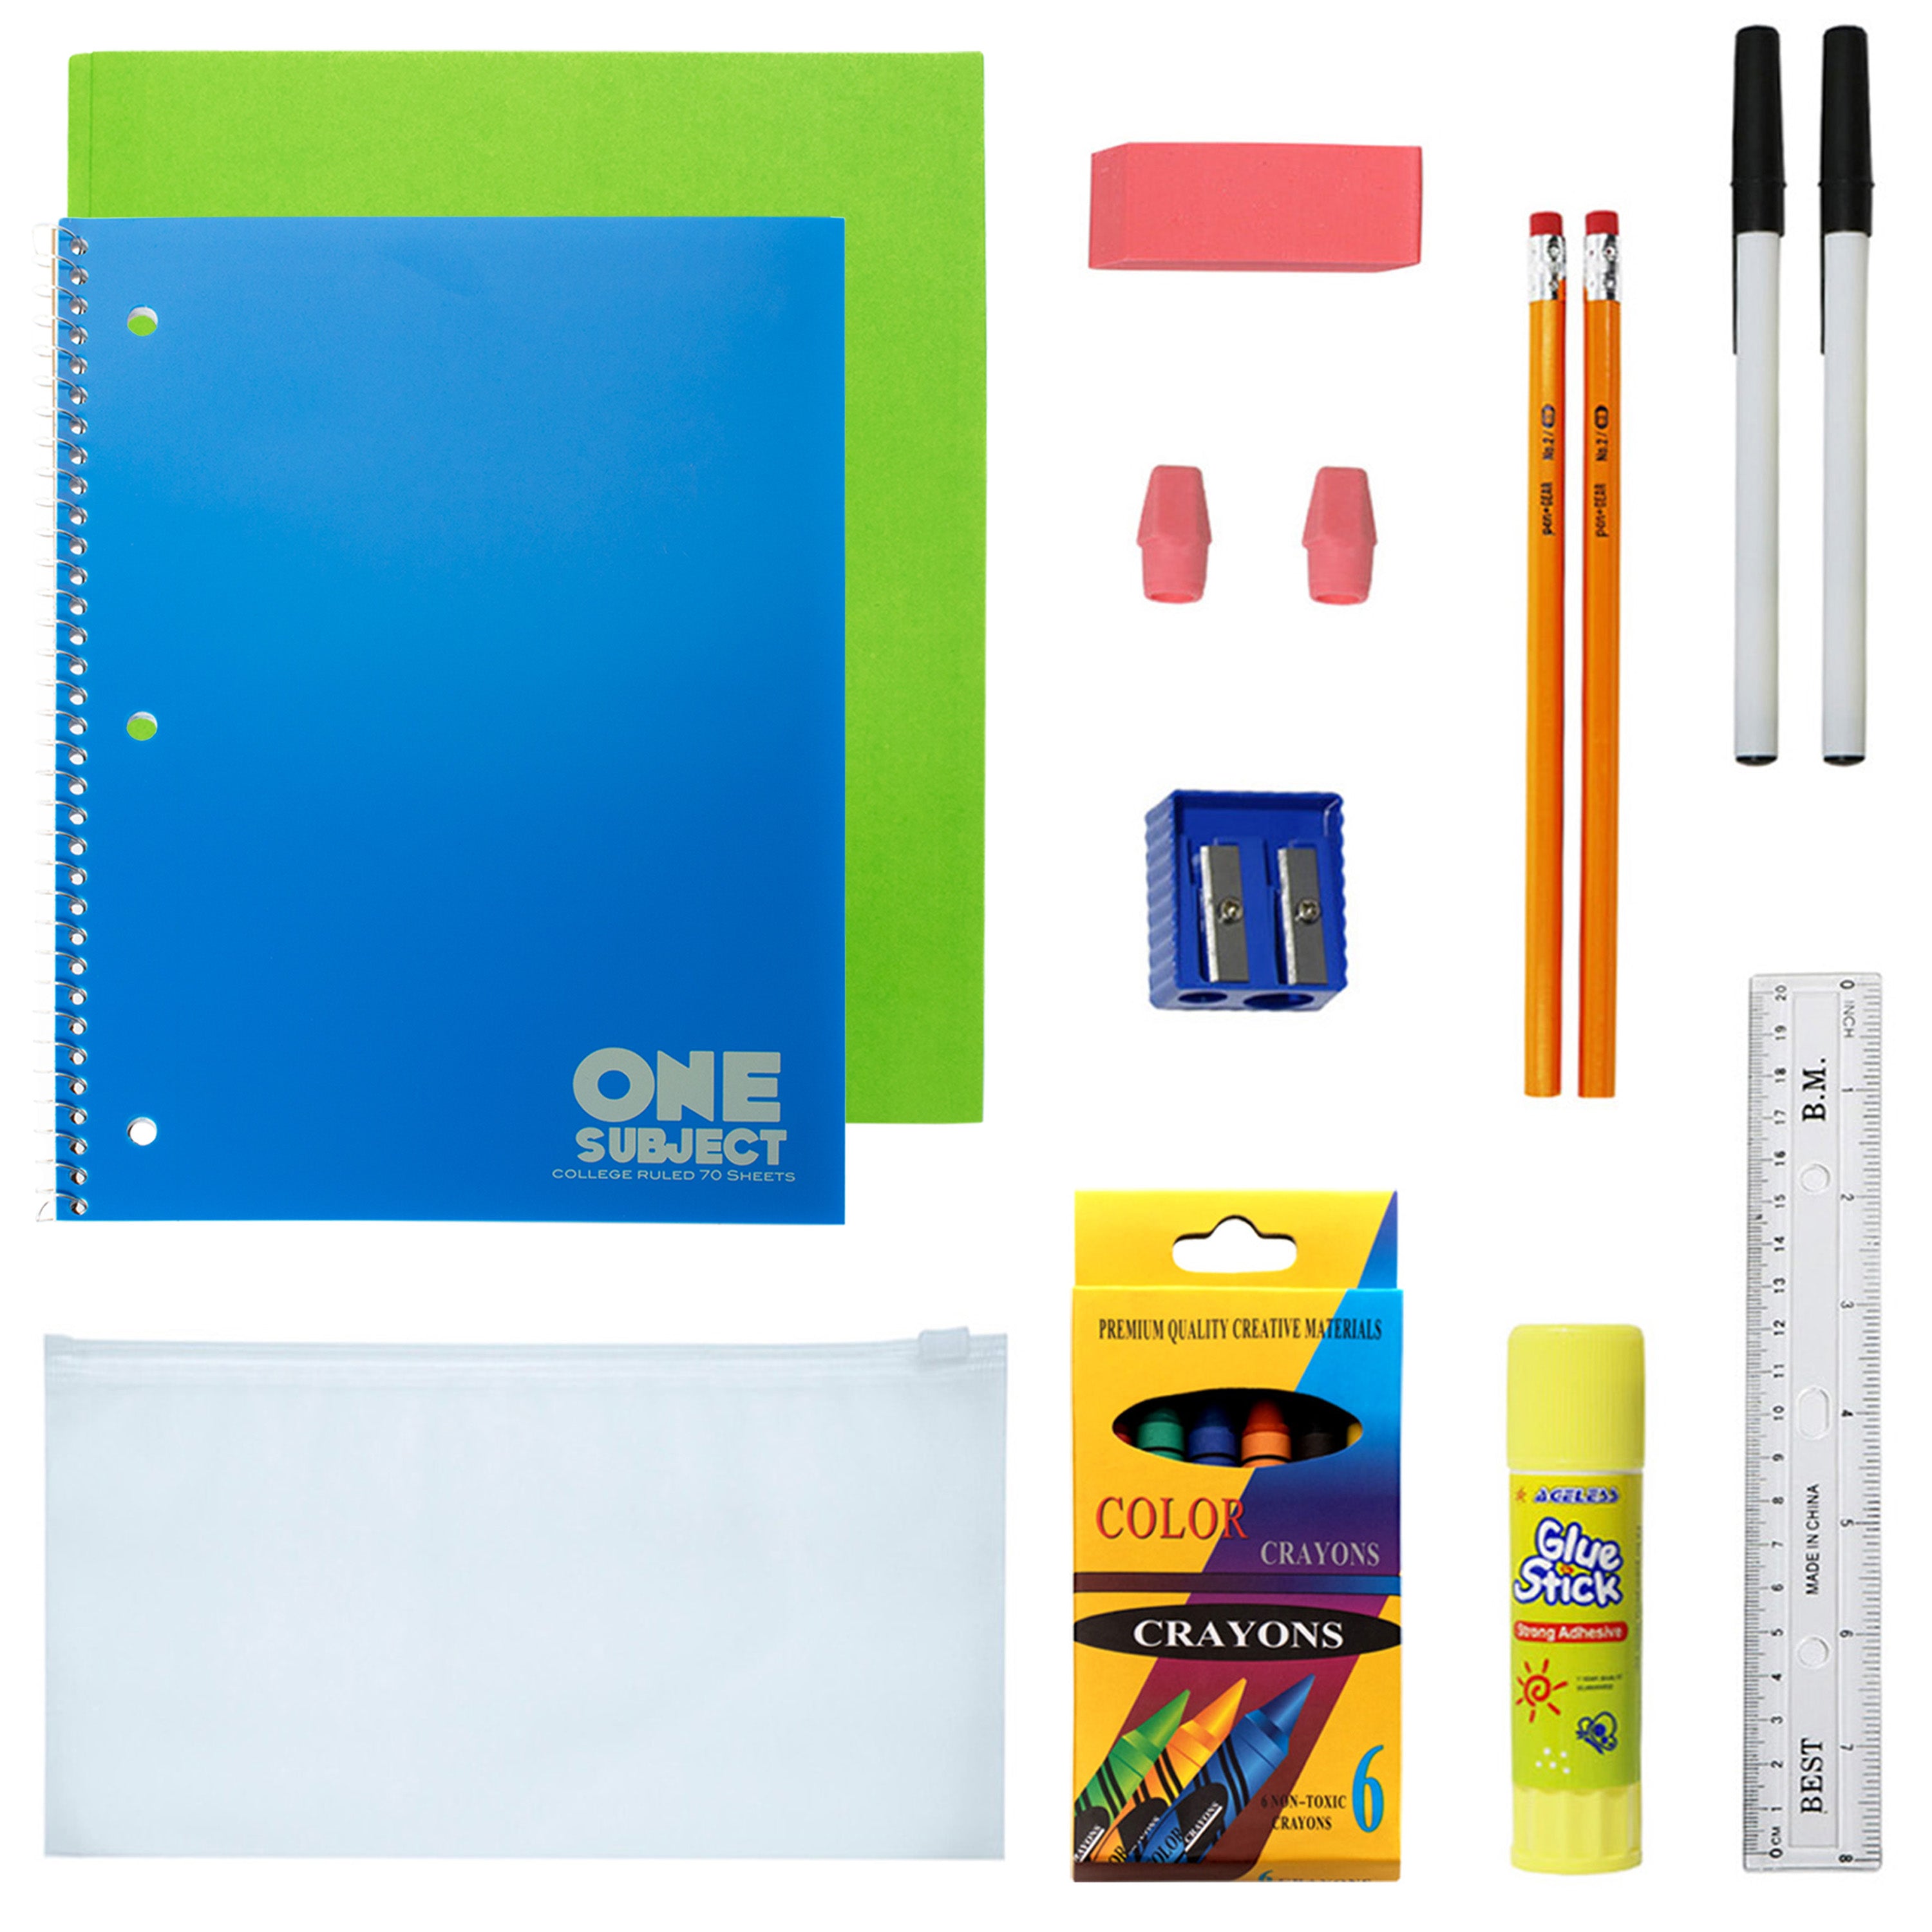 18 Piece Wholesale Basic School Supply Kit With 17" Backpack - Bulk Case of 12 Backpacks and Kits